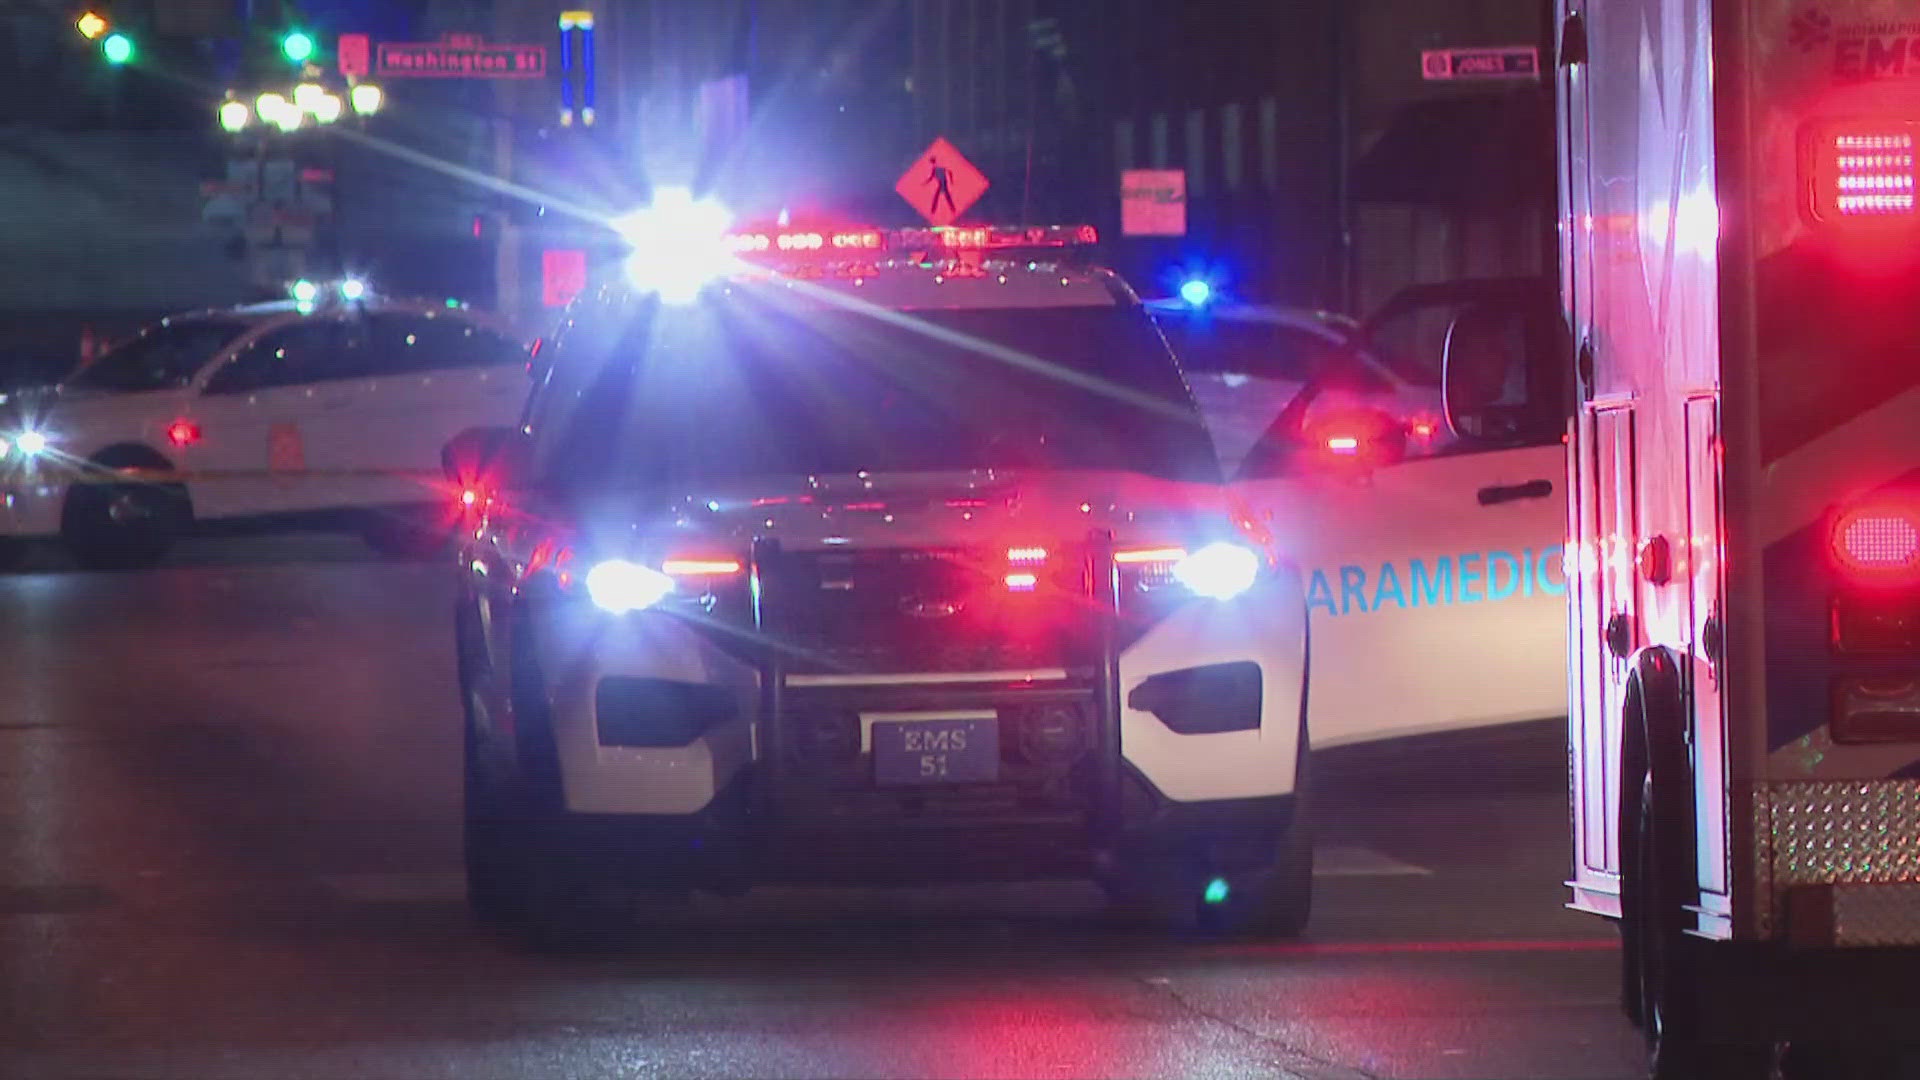 According to IMPD, the officer who opened fire was wearing a body cam, but it didn't turn on.